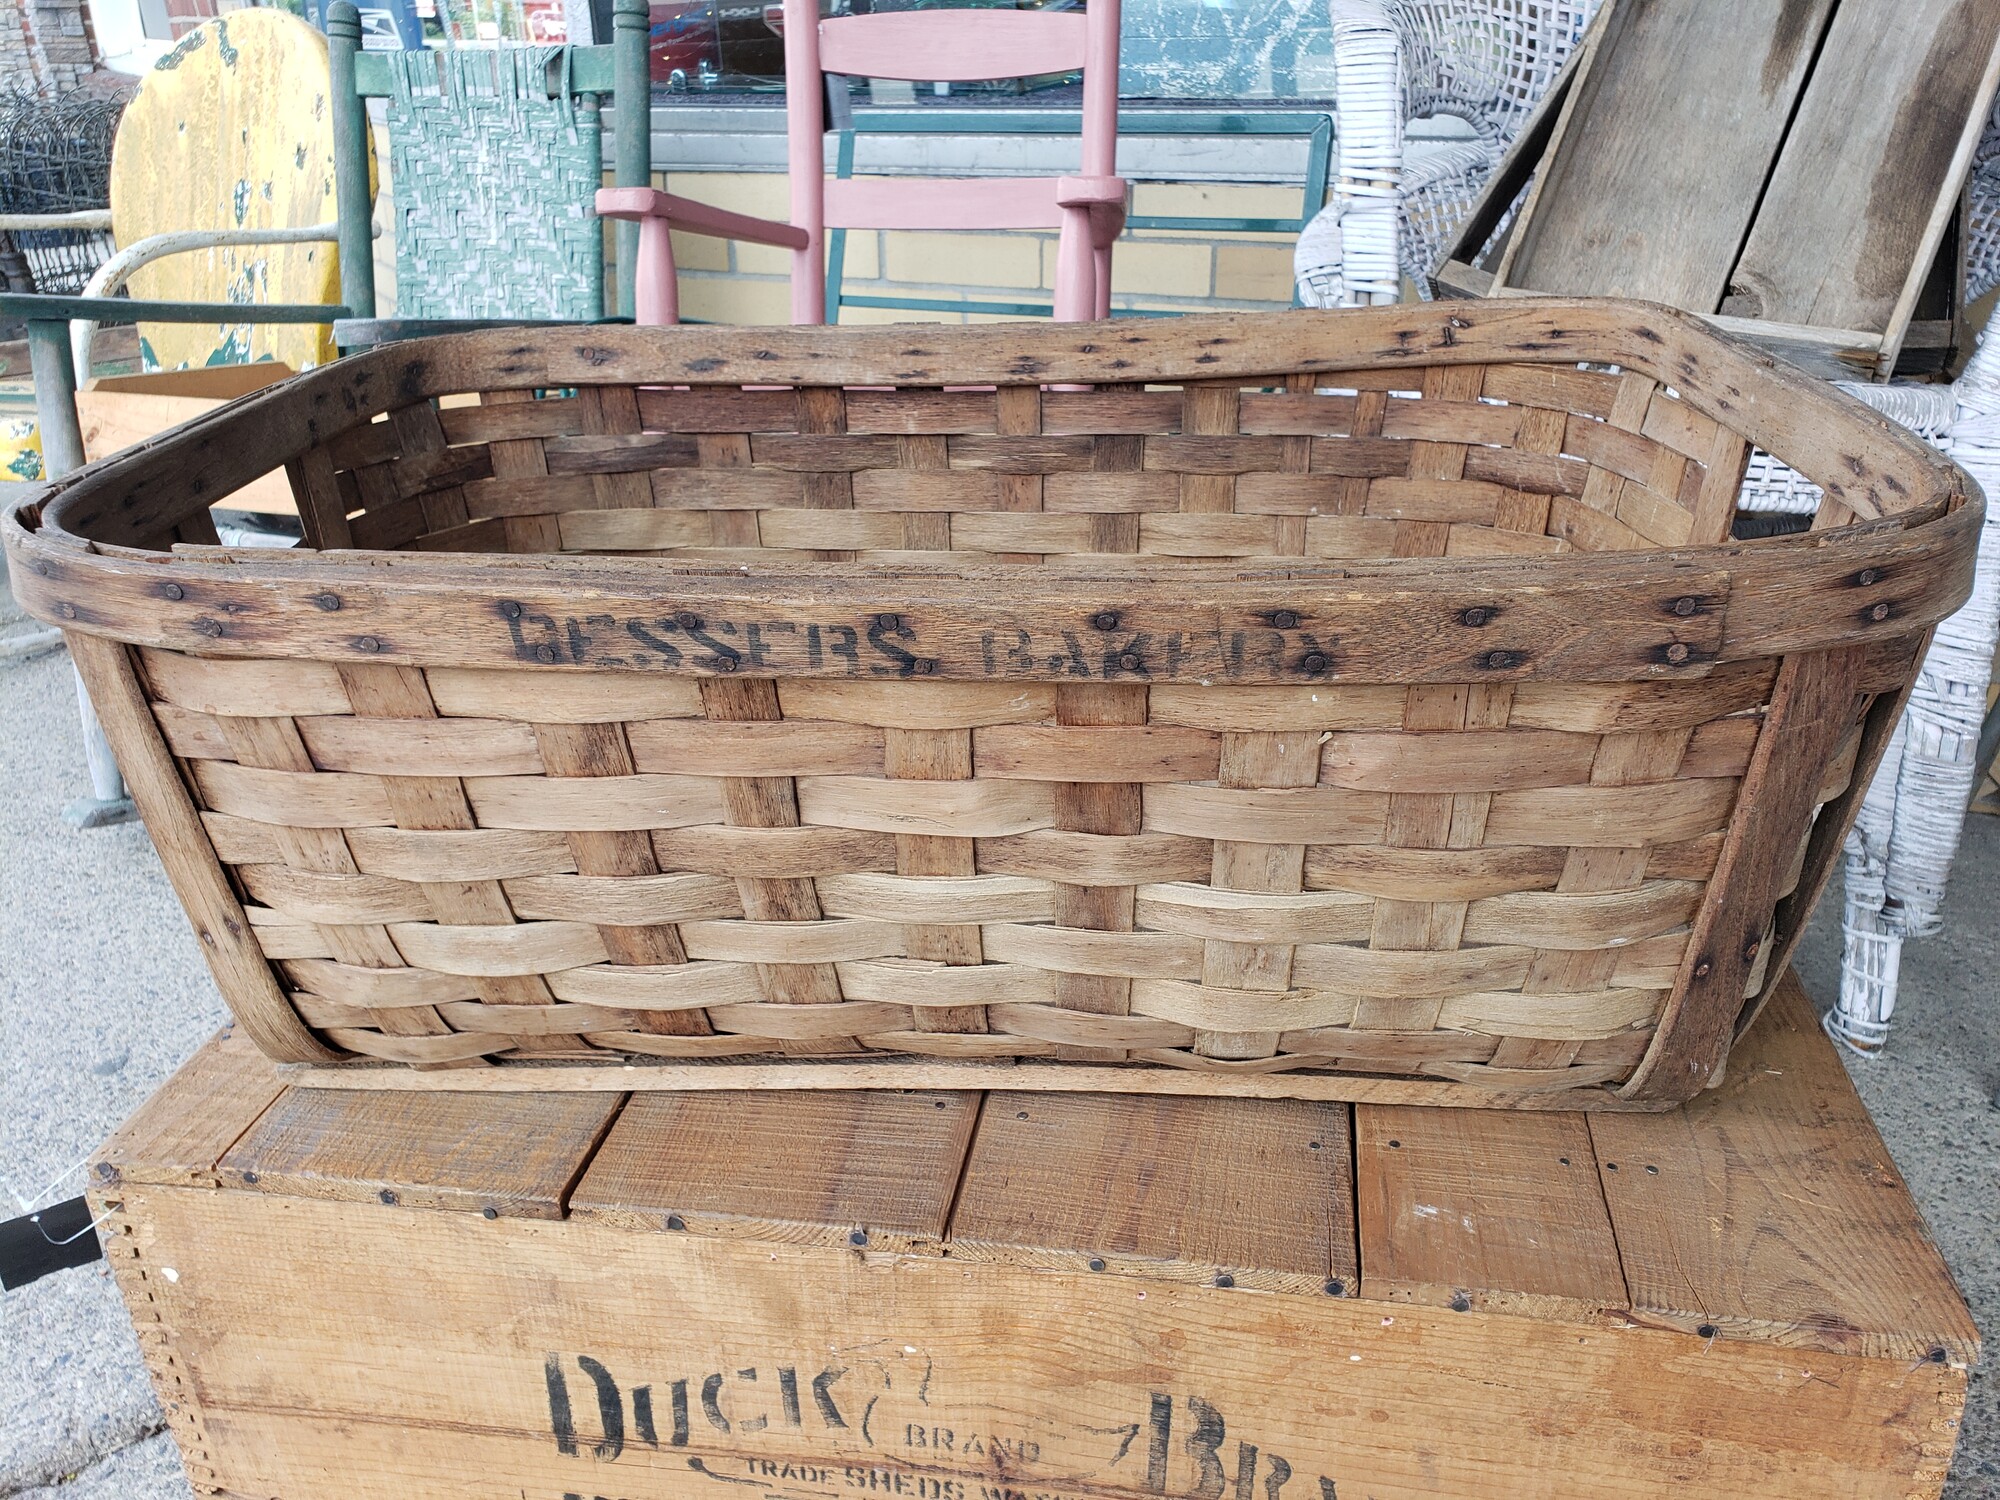 Vtg Bakery Delivery Basket, Wood, Size: 29x19x11
stamped with Dessers Bakery on side